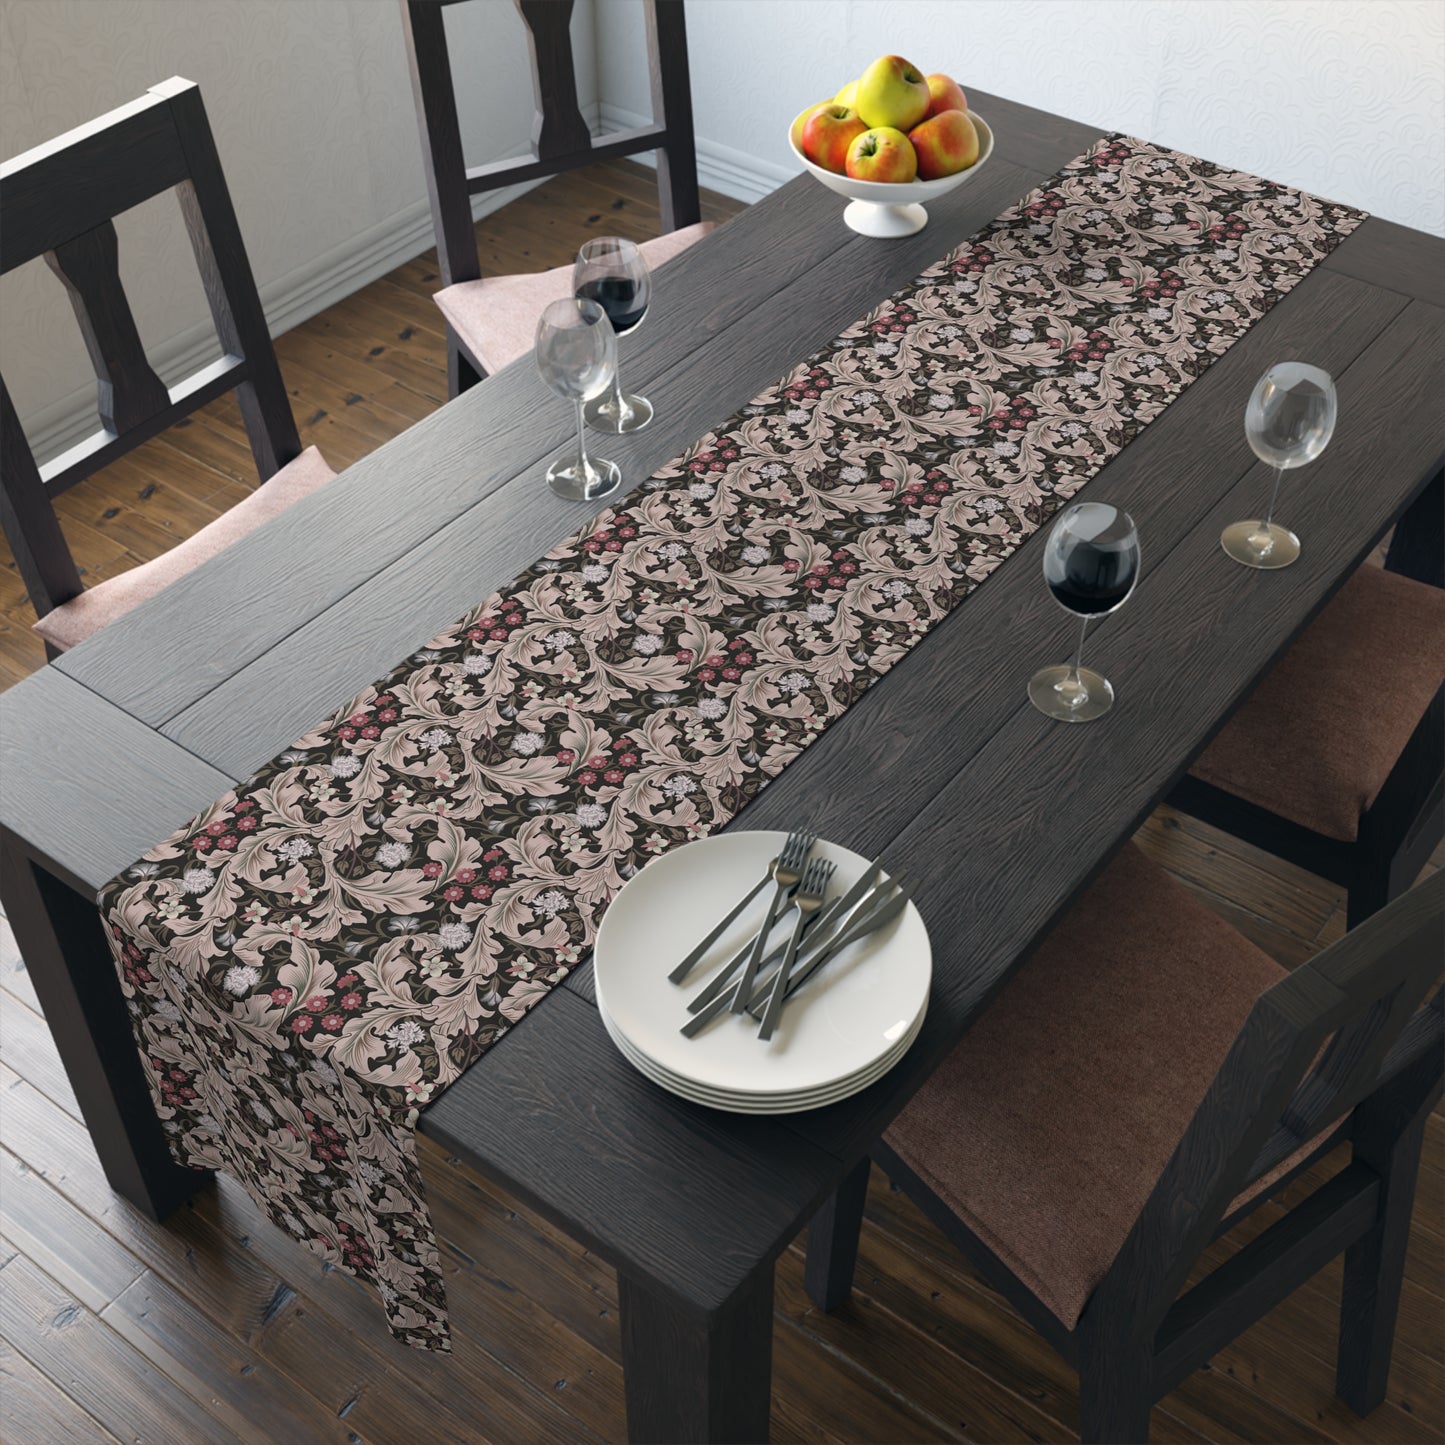 william-morris-co-table-runner-leicester-collection-mocha-21